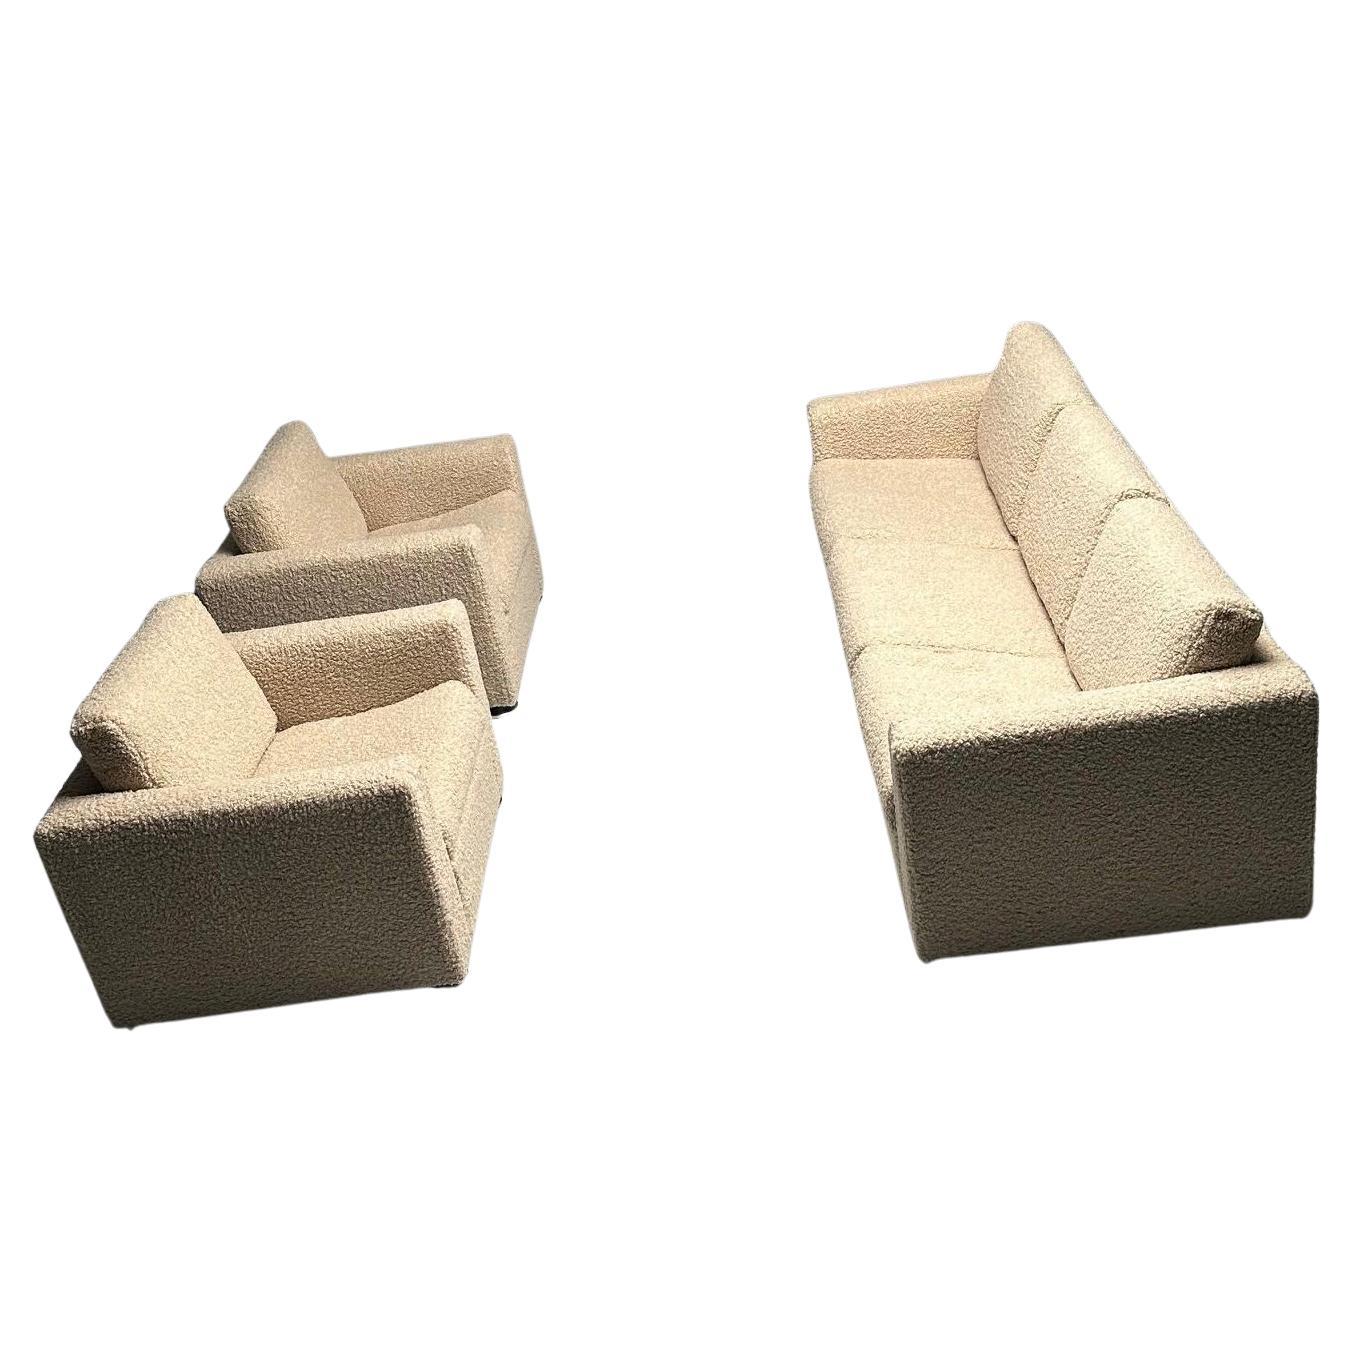 Stendig Living Room, Sofa, Pair of Cube Chairs, New Boucle, Switzerland, Labeled For Sale